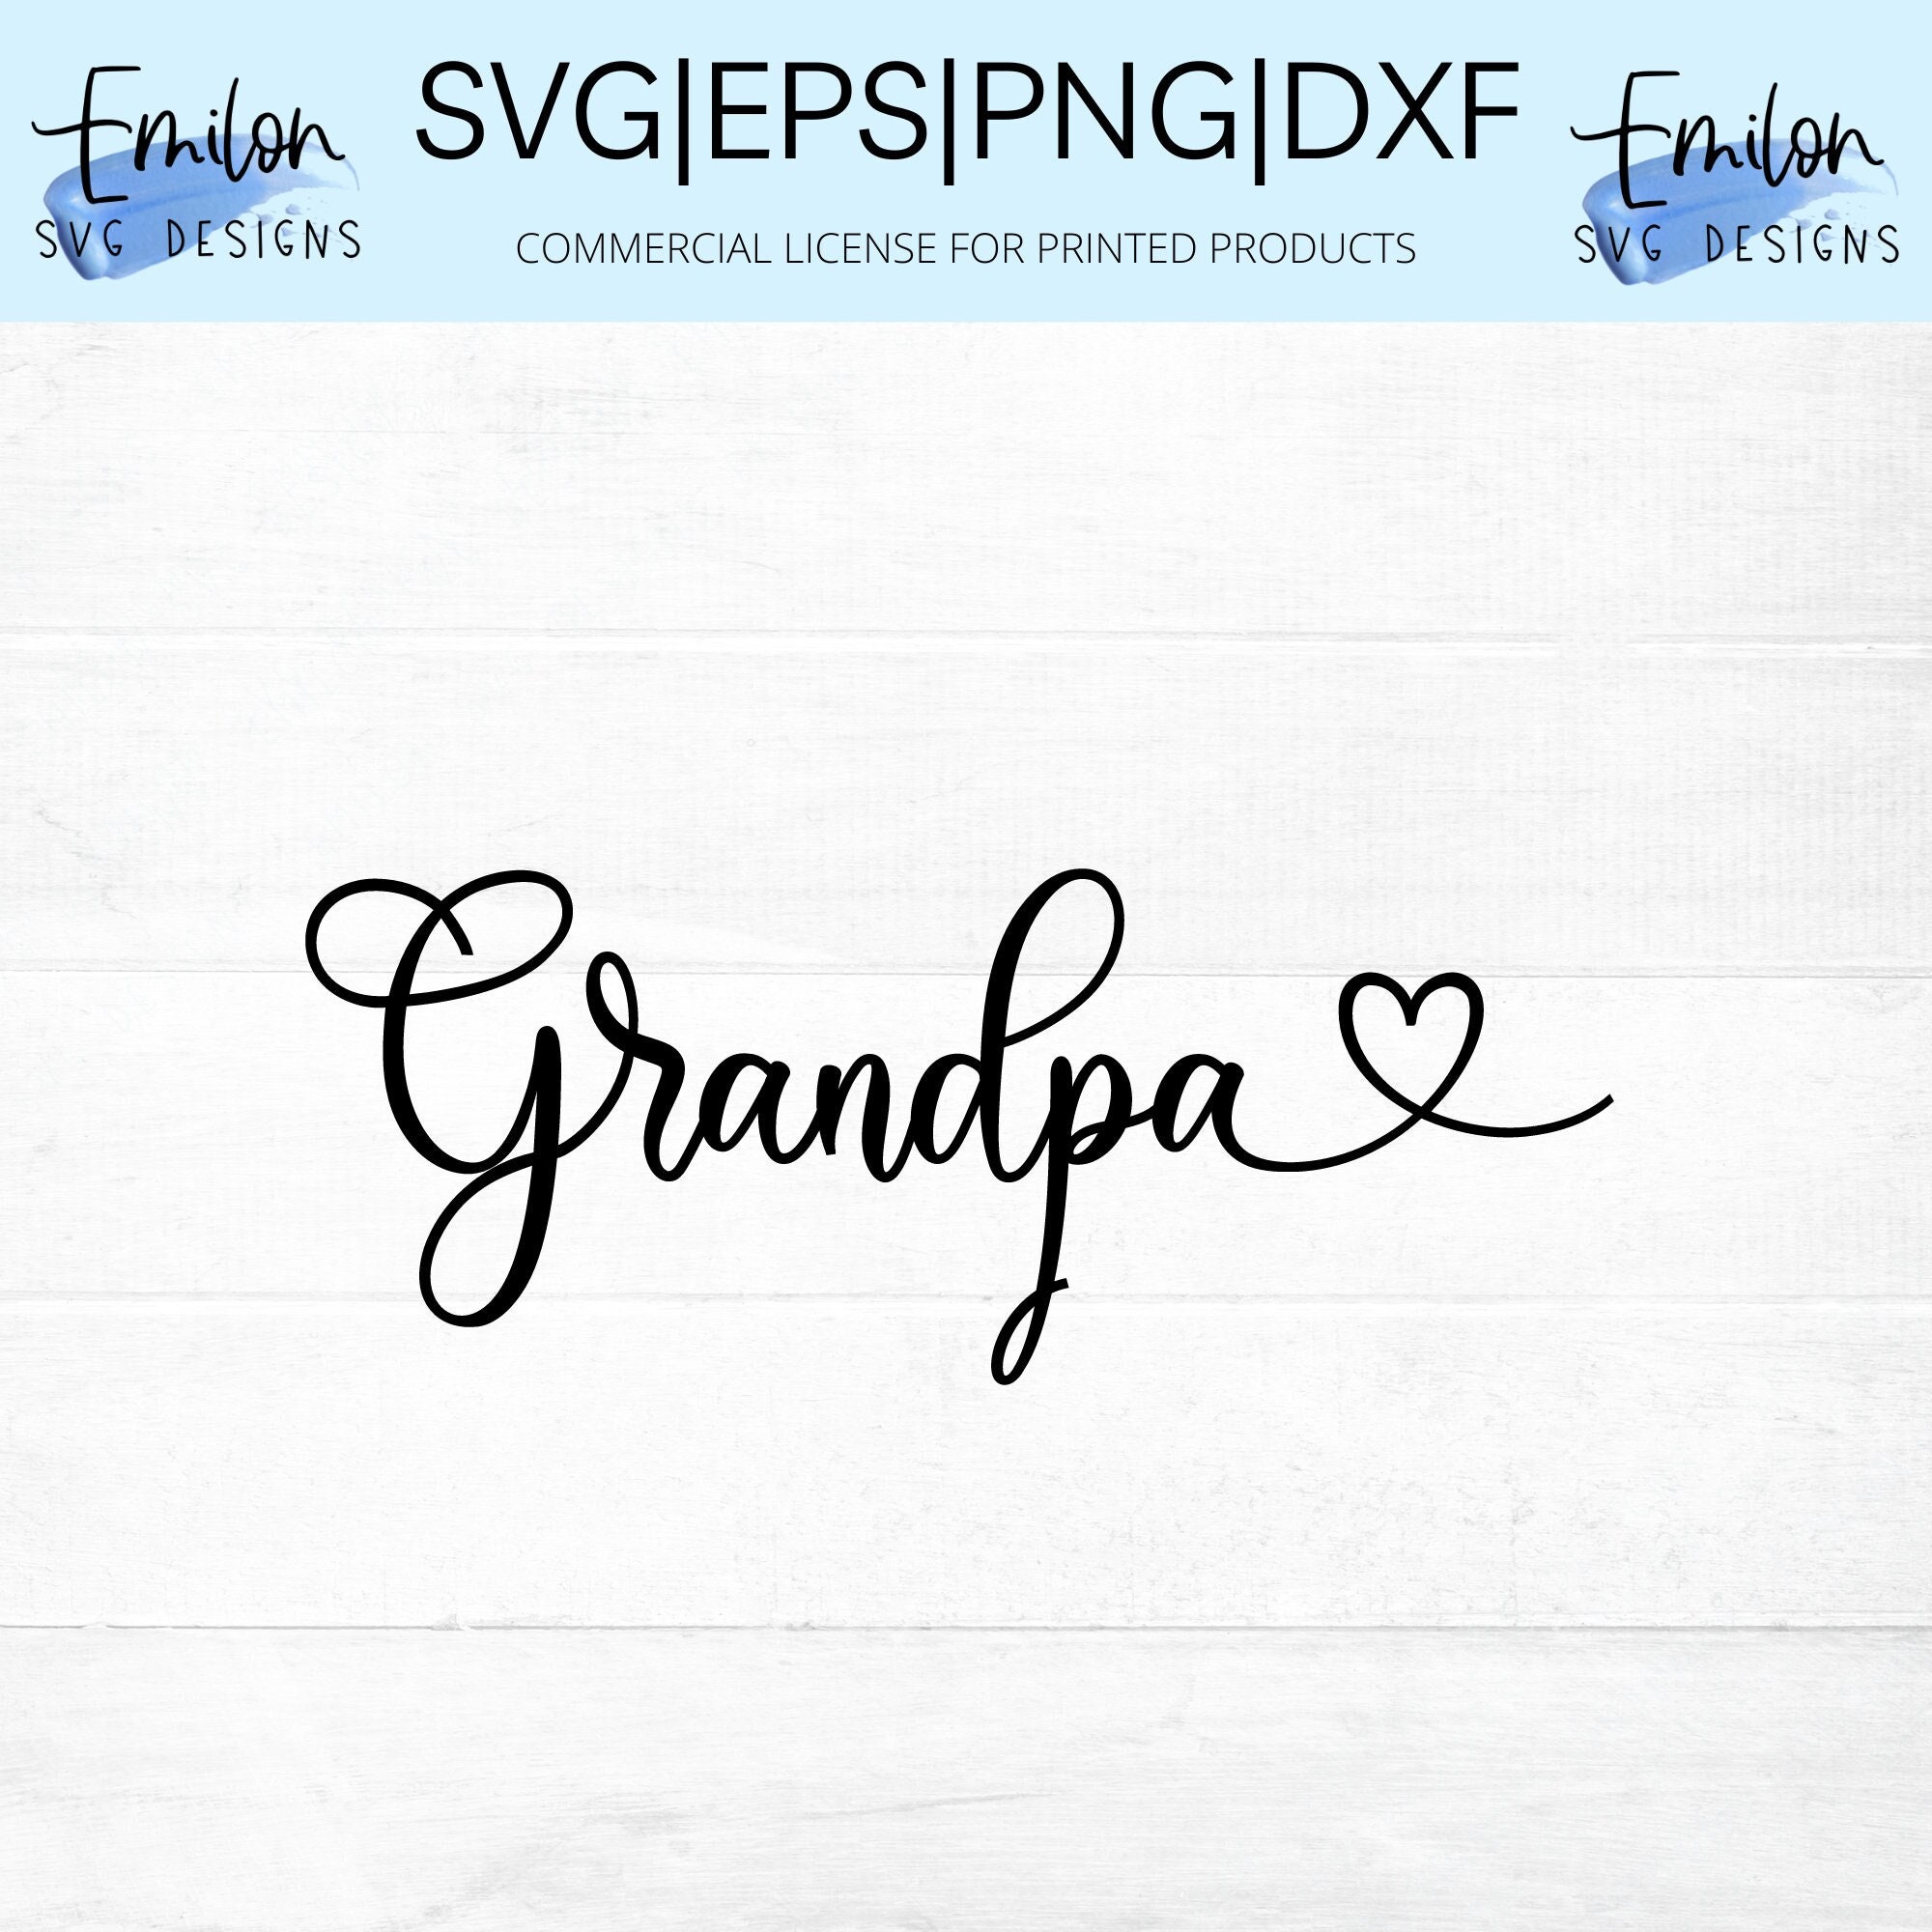 Grandpa SVG Cut File for Cricut and Silhouette With Heart Detail, PNG, EPS,  Dxf Father's Day Svg -  Canada